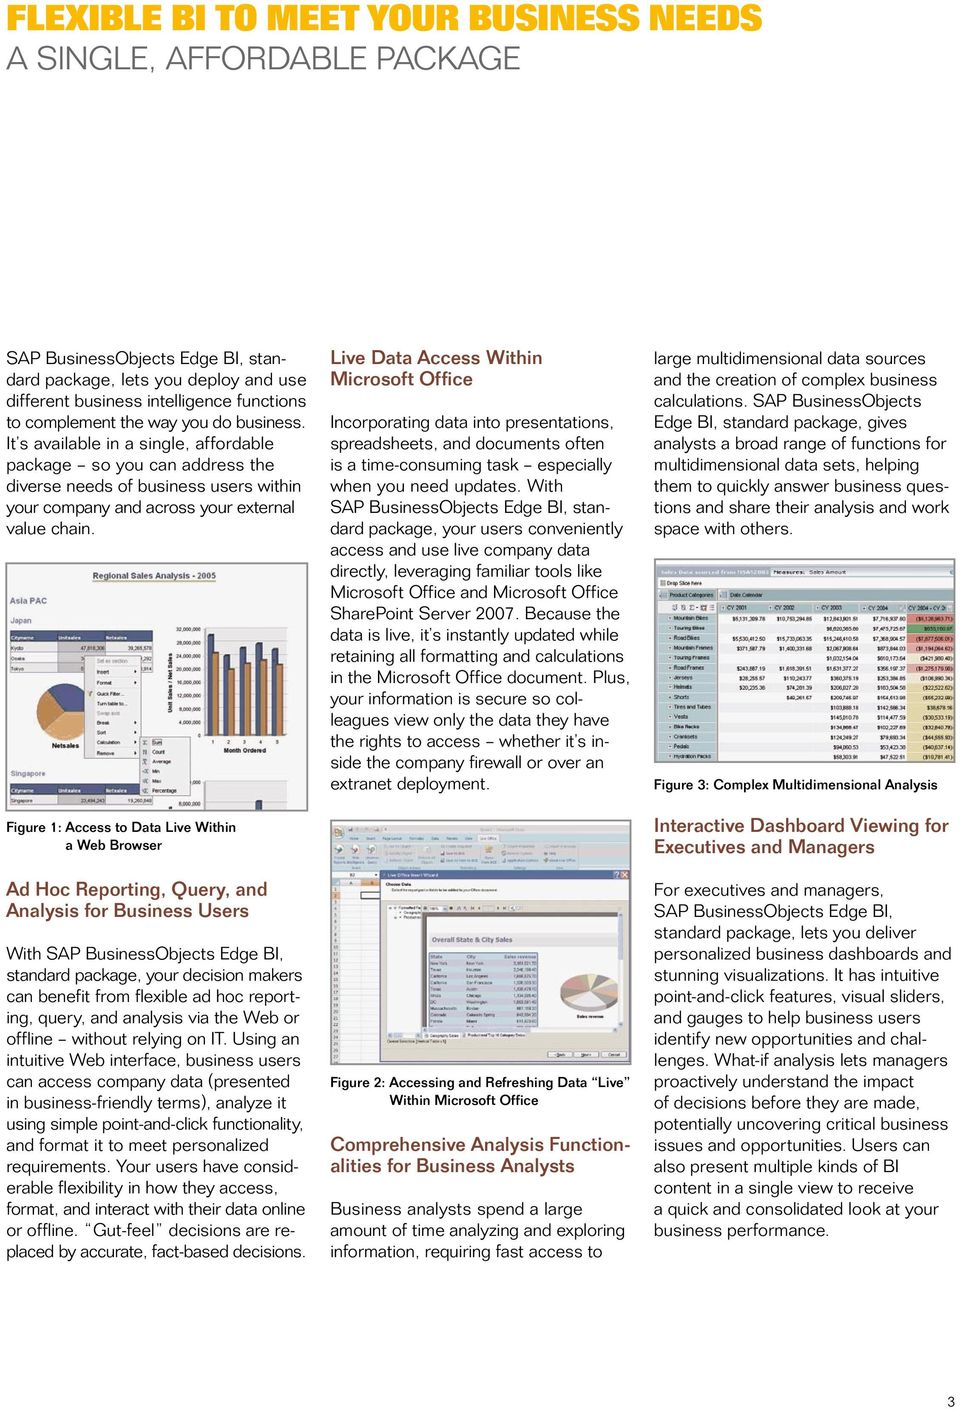 Figure 1: Access to Data Live Within a Web Browser Ad Hoc Reporting, Query, and Analysis for Business Users With SAP BusinessObjects Edge BI, standard package, your decision makers can benefit from